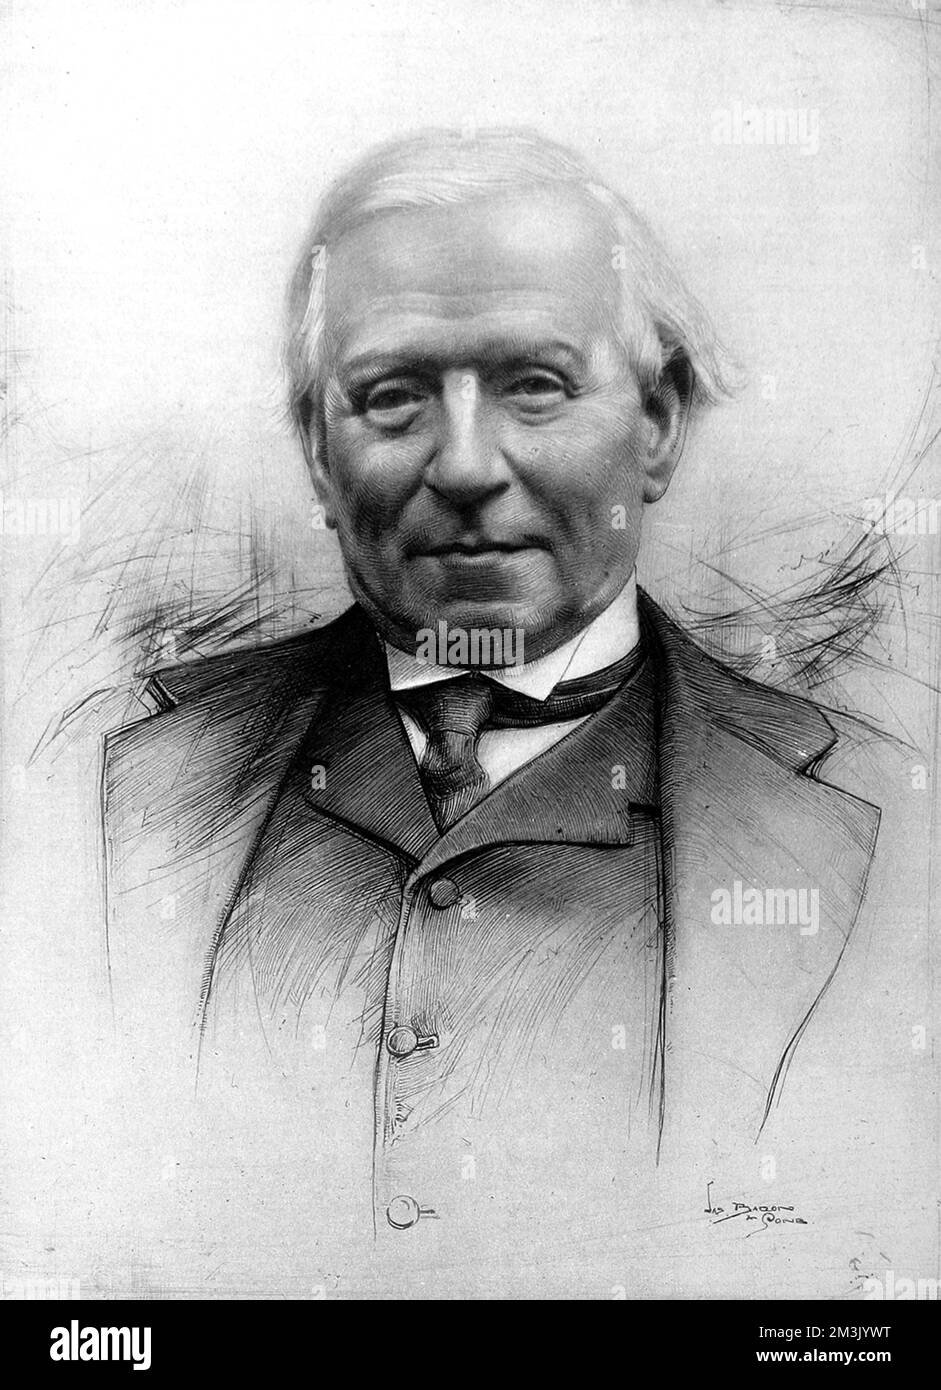 Herbert Henry Asquith, 1st Earl of Oxford & Asquith (1852 - 1928), English statesman served as QC, Liberal MP for East Fife and Paisley and Prime Minister. Stock Photo